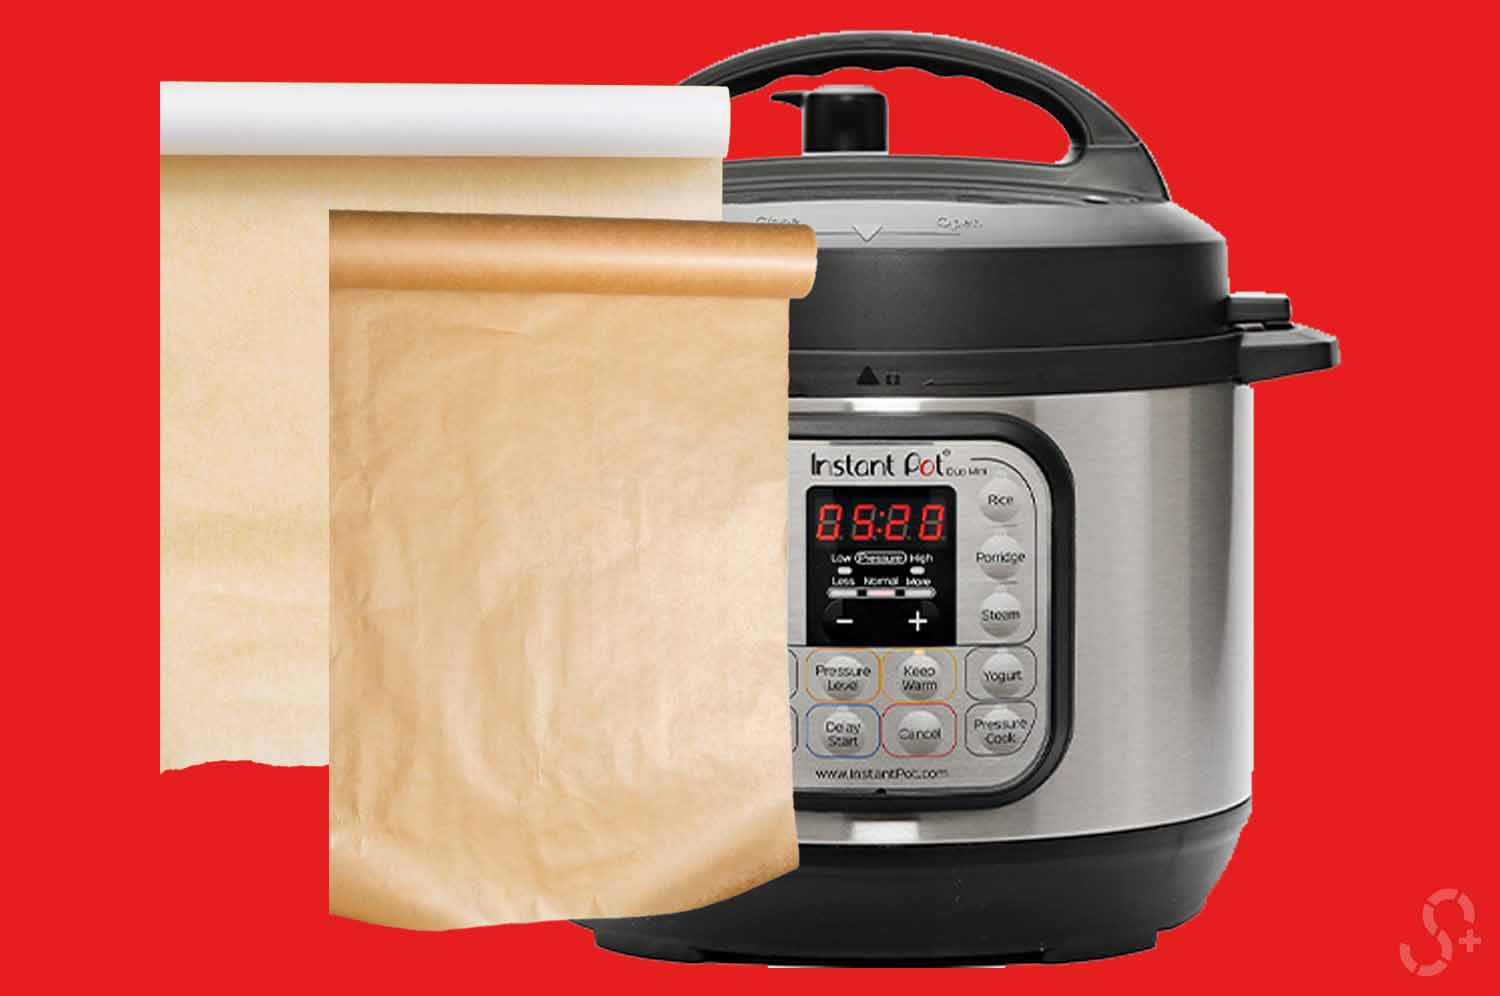 Roll of Wax and Parchment Paper beside Instant Pot in front of red background